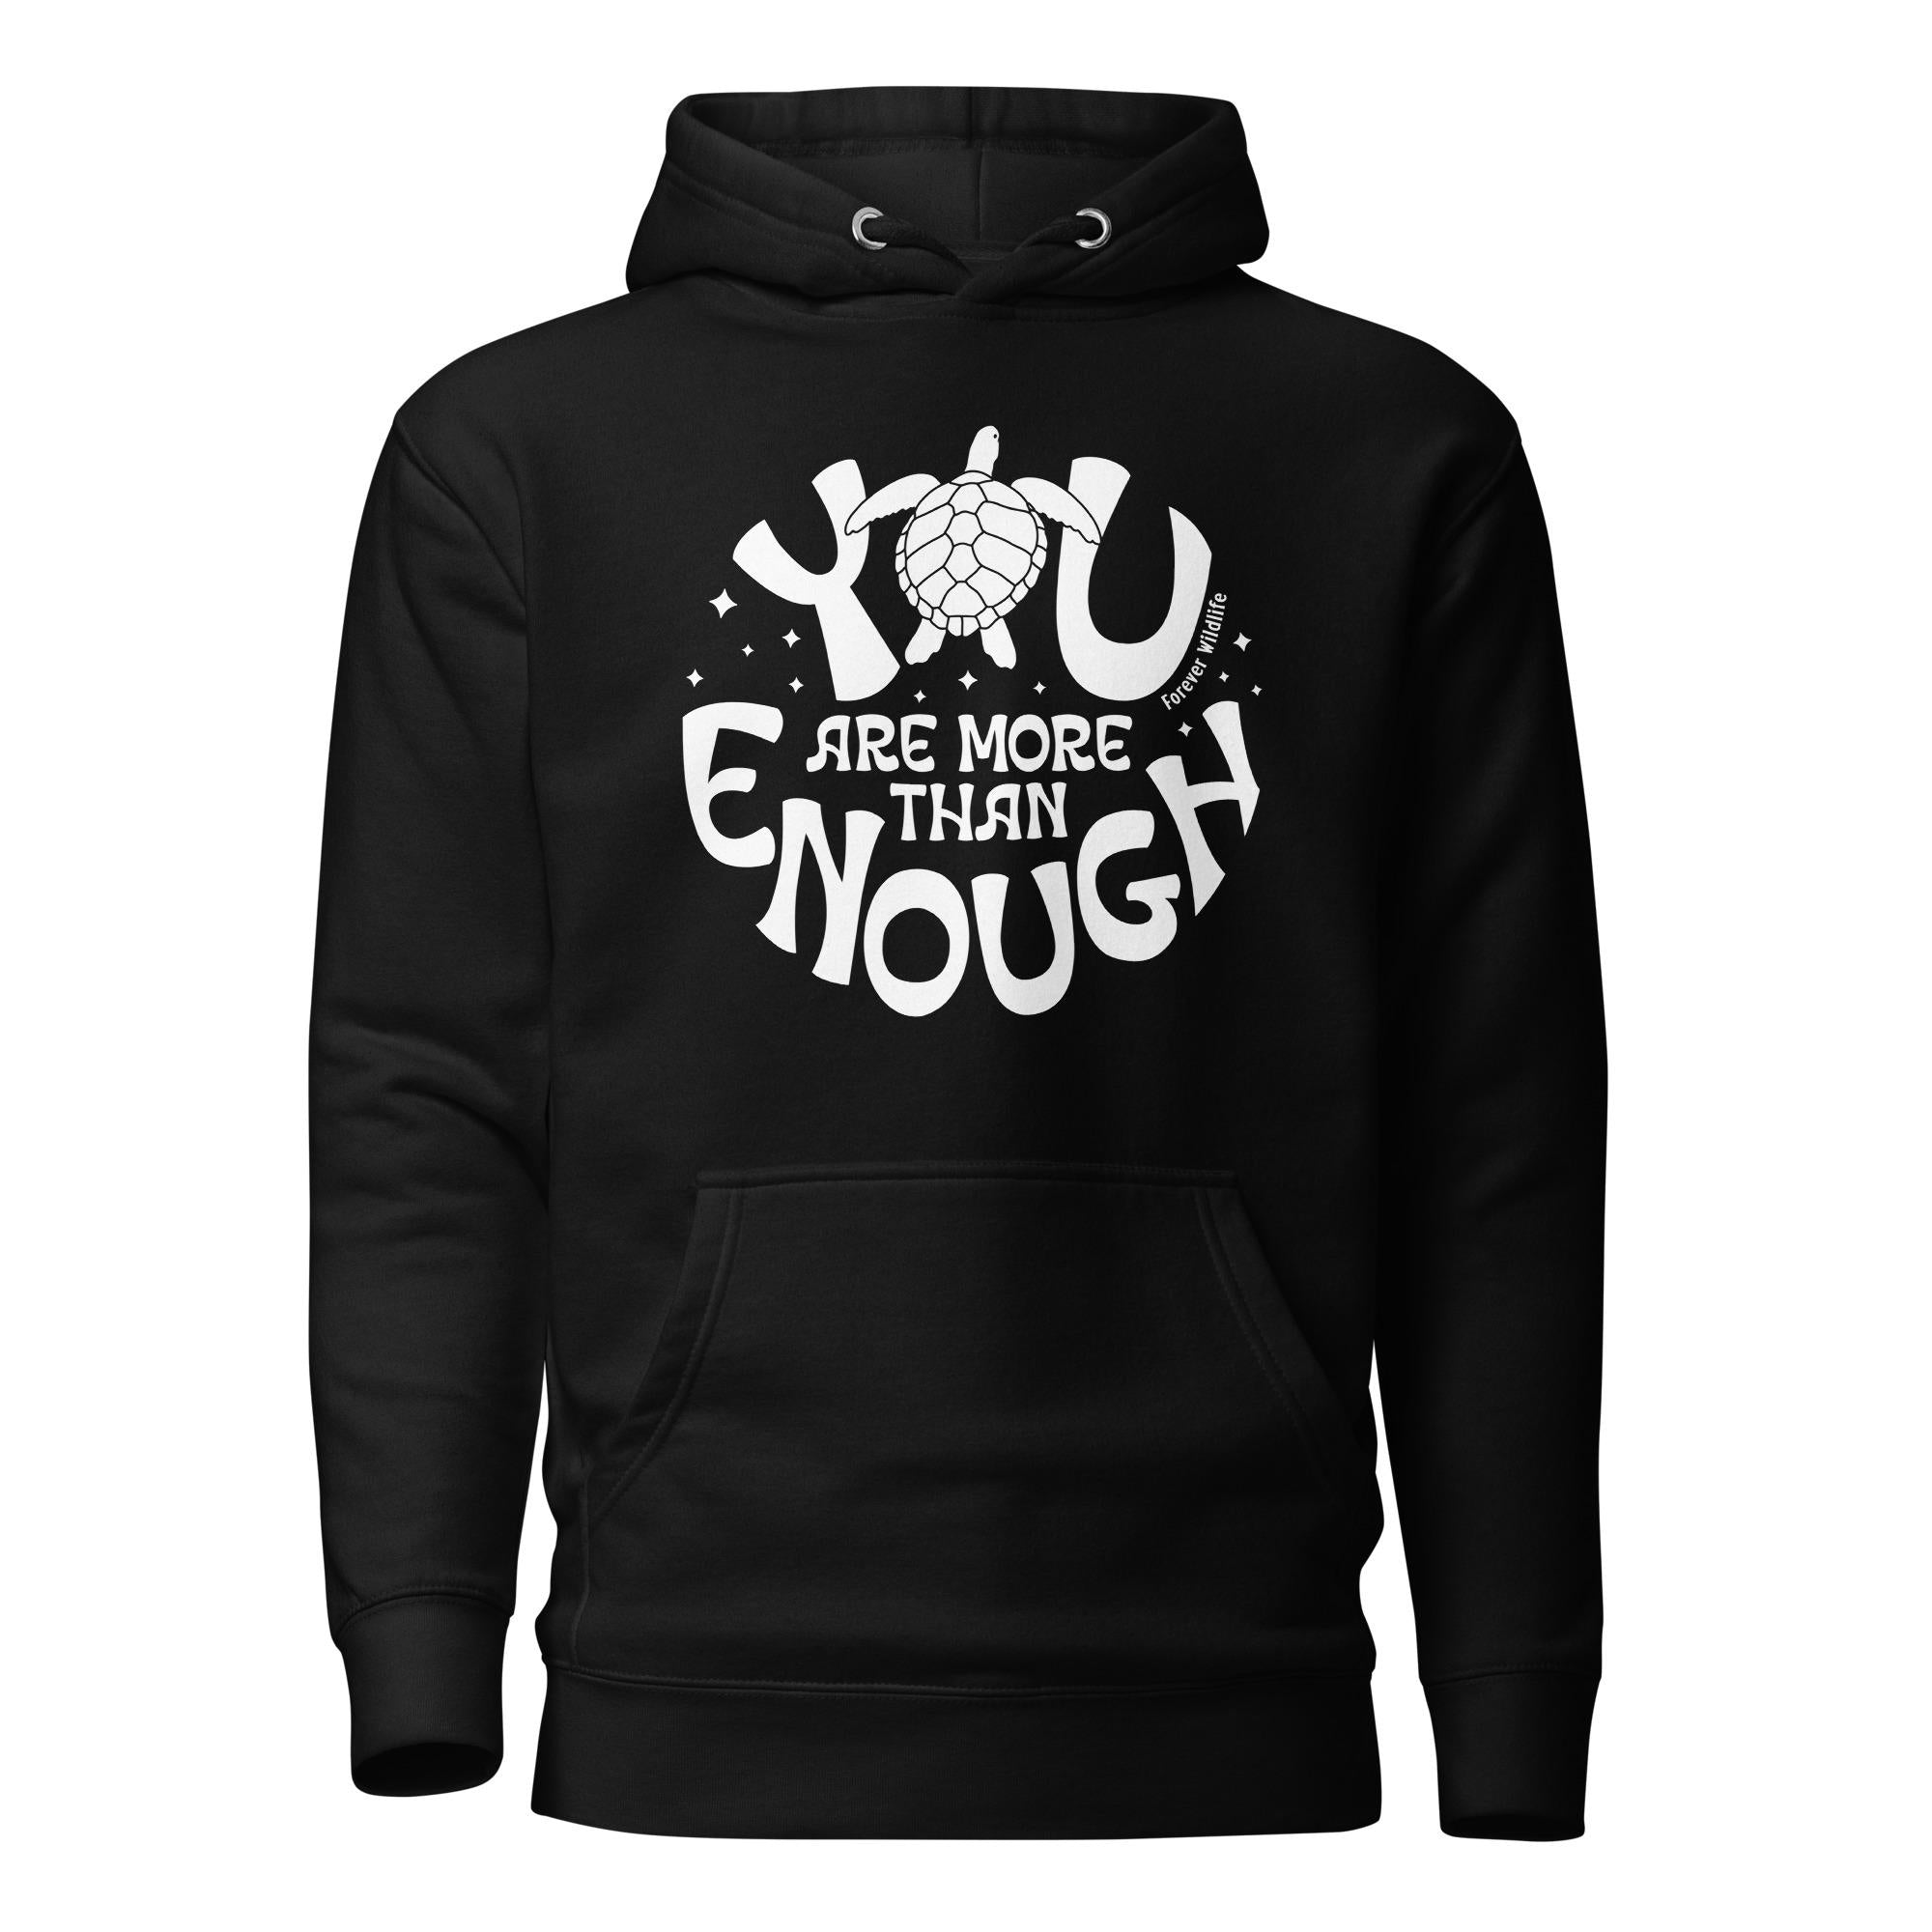 Sea Turtle Hoodie in Black – Premium Wildlife Animal Inspirational Hoodie Design with YOu Are More Than Enough text, part of Wildlife Hoodies & Clothing from Forever Wildlife